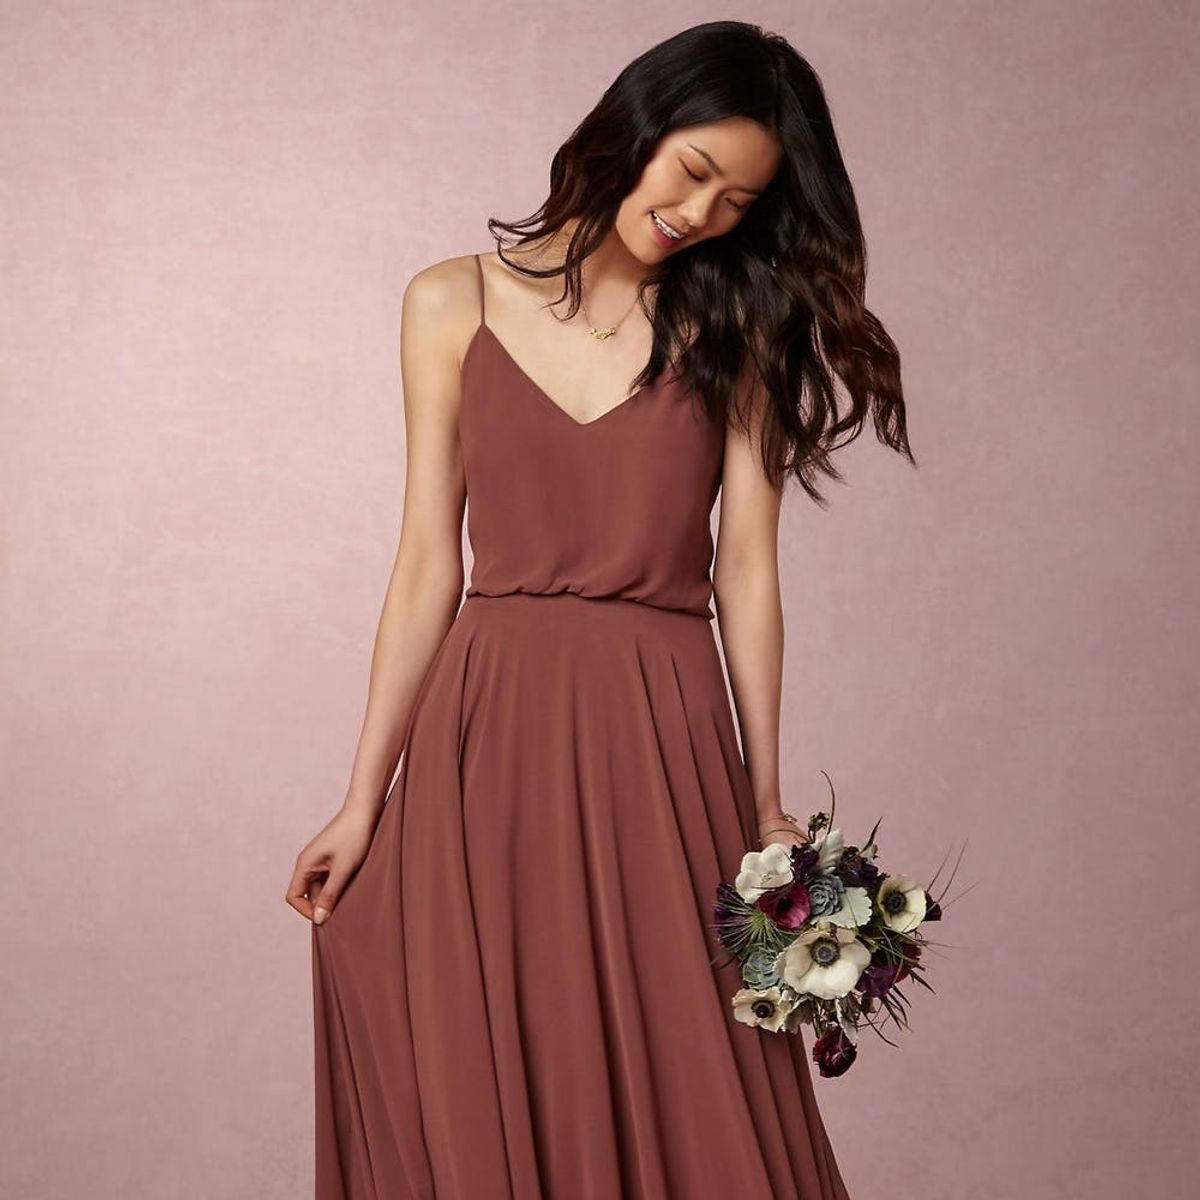 21 Unexpected Colors for Fall Bridesmaids to Rock This Season